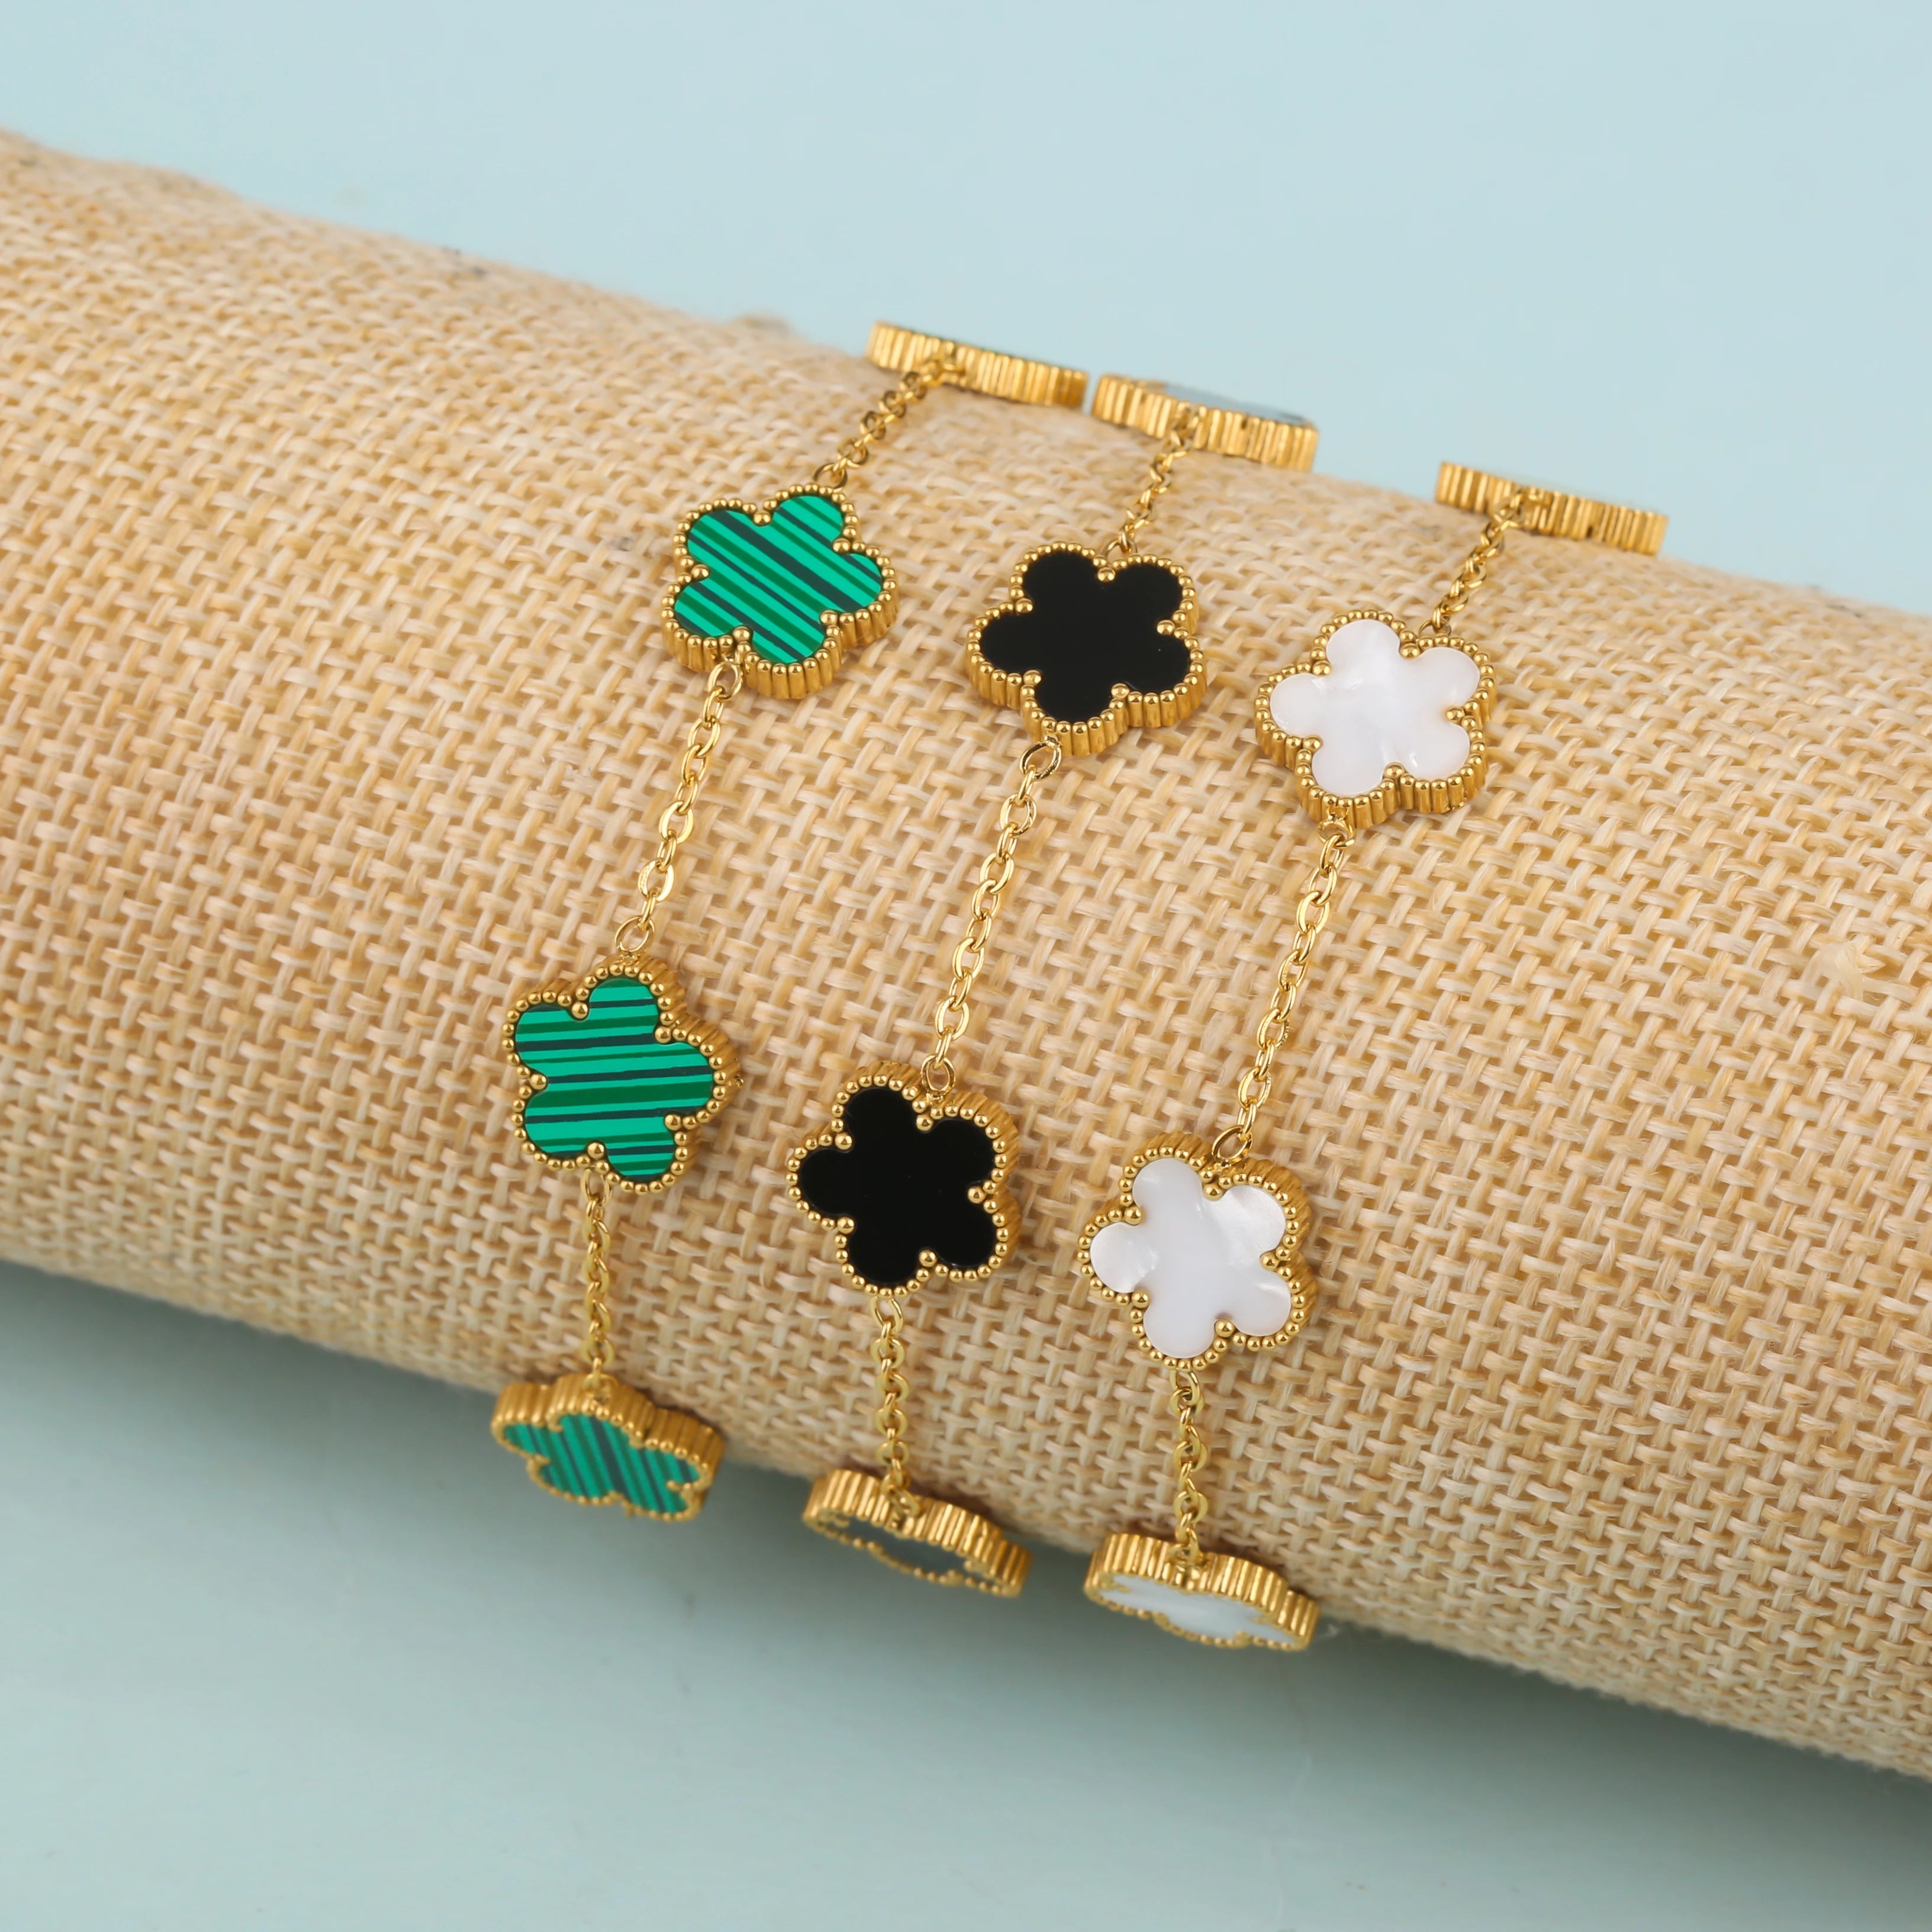  Stainless Steel Clover Bracelet for Women - Adjustable Five-Leaf Flower with Shell and Acrylic Design 